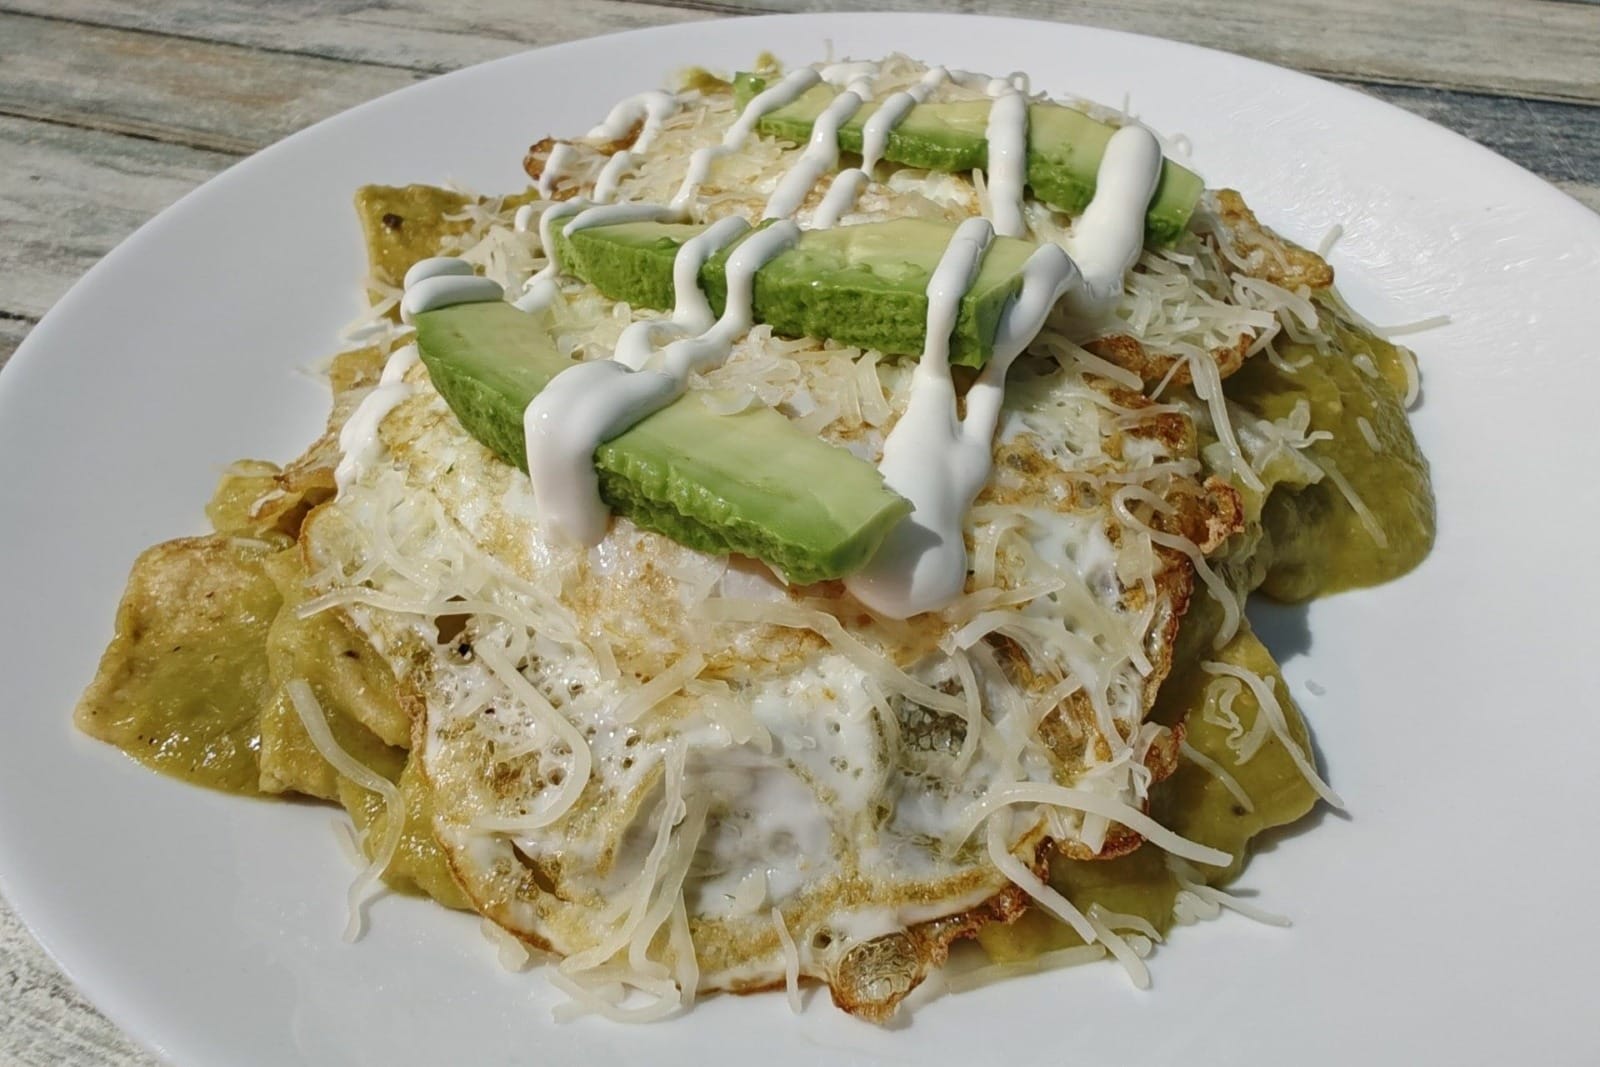 Chilaquiles at Anchor Island.